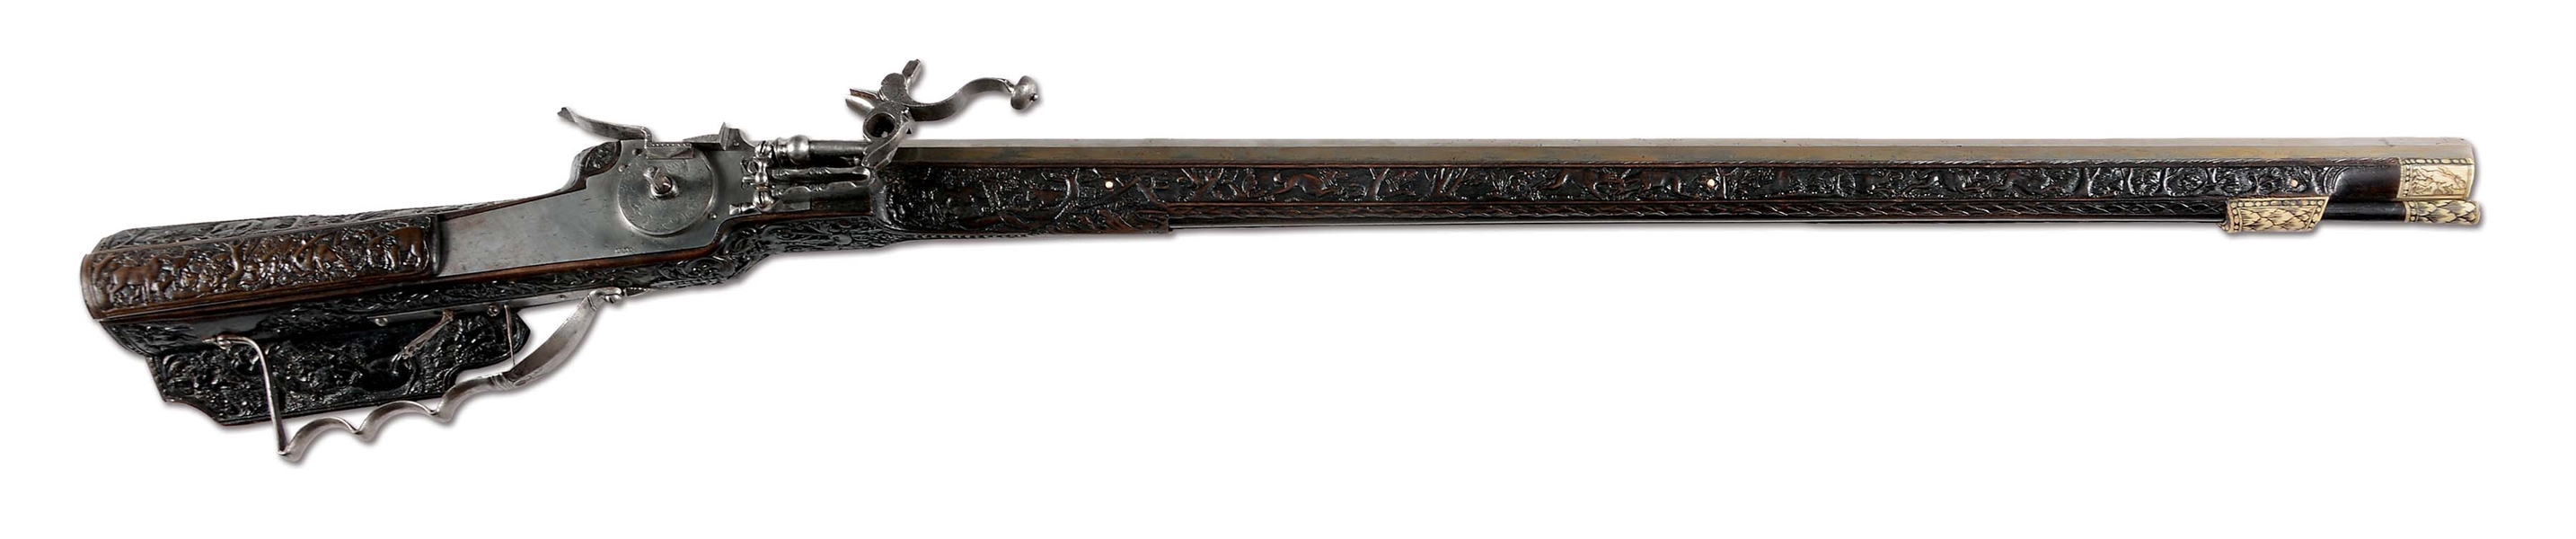 (A) MAGNIFICENT AND SPLENDID GERMAN WHEELOCK SPORTING RIFLE LAVISHLY AND ELABORATELY CARVED THROUGHOUT ITS LENGTH BY GEORG MAUCHER OF SCHWABISCH GMUND, CIRCA 1660.